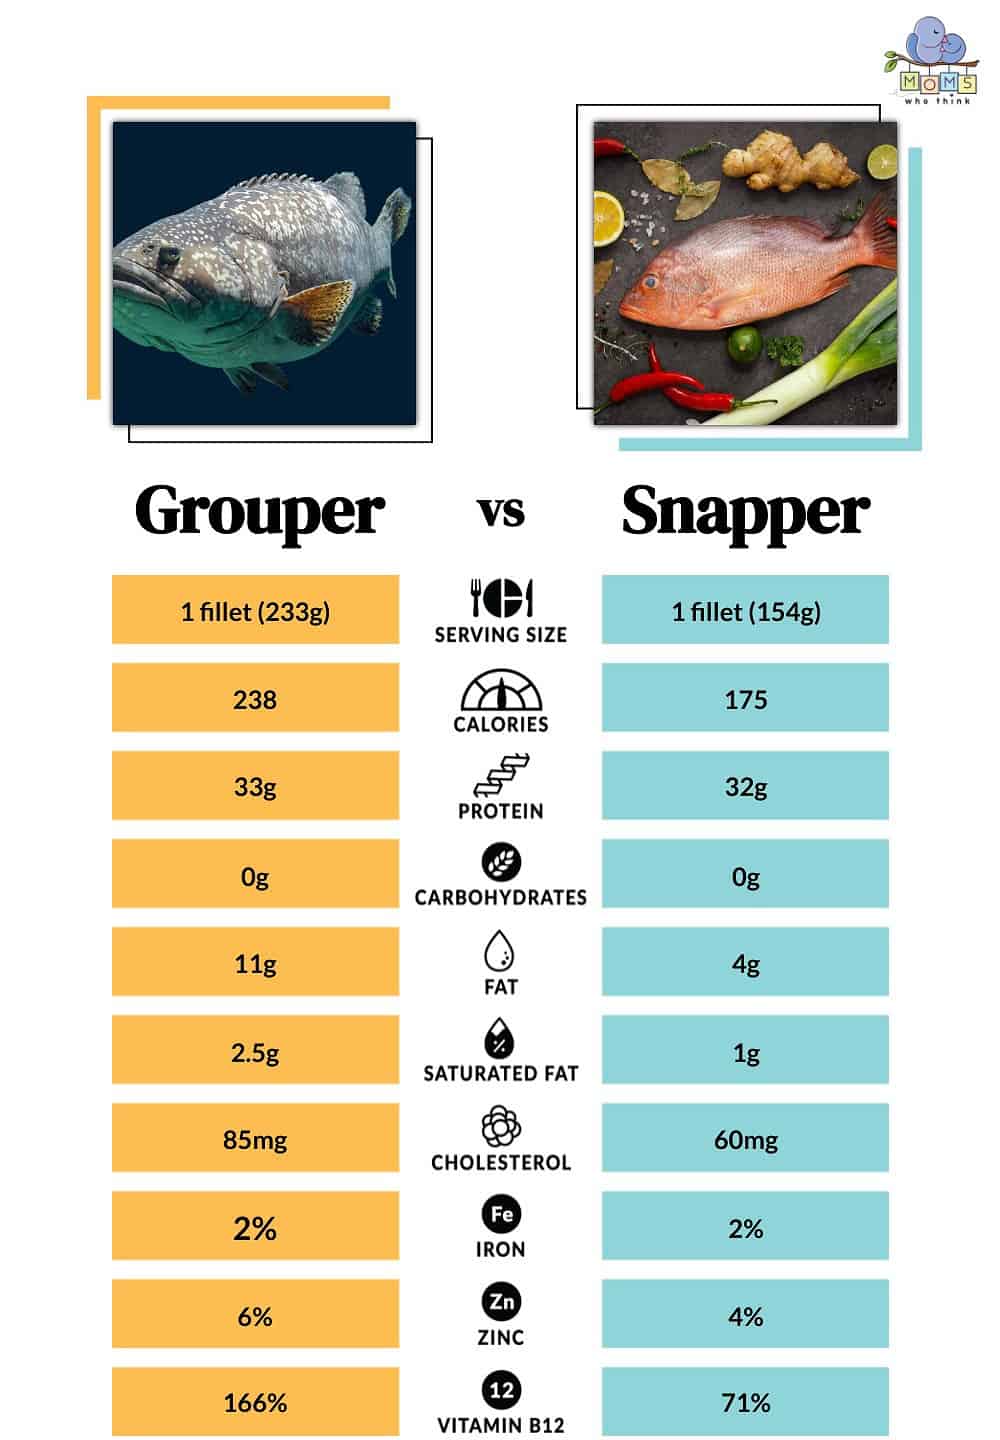 Grouper vs Snapper Nutritional Facts